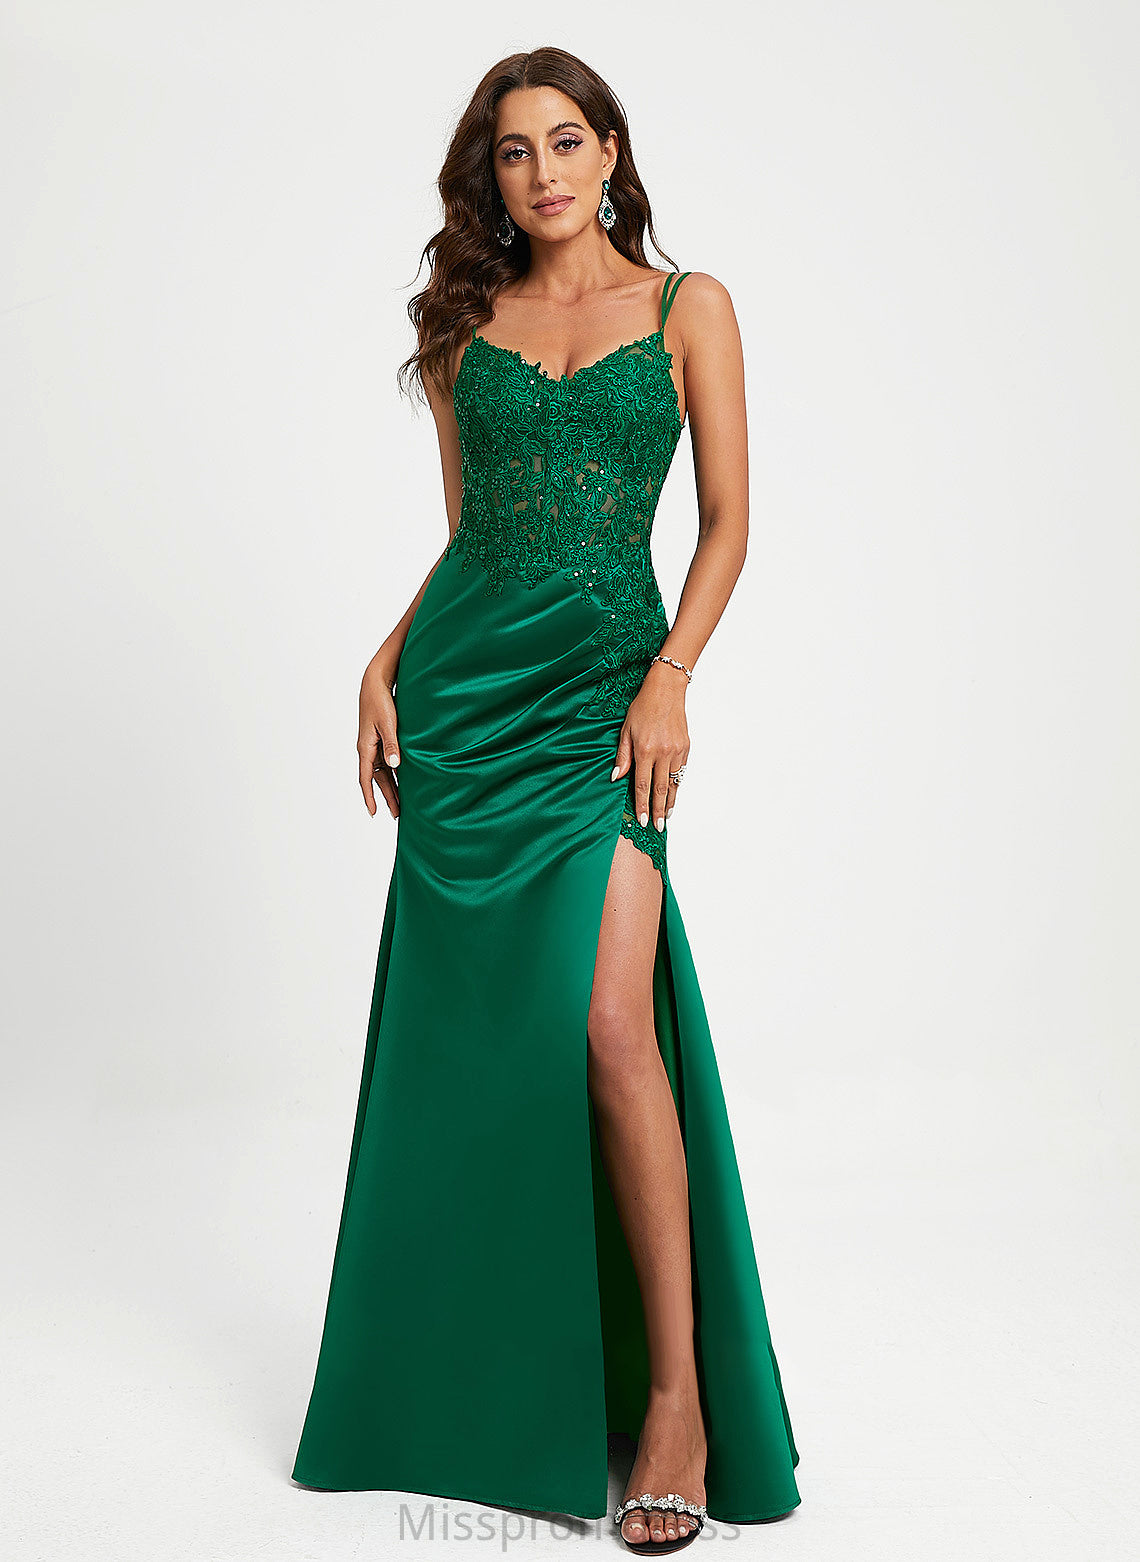 Lace V-neck Sequins With Adrienne Prom Dresses Floor-Length Satin Sheath/Column